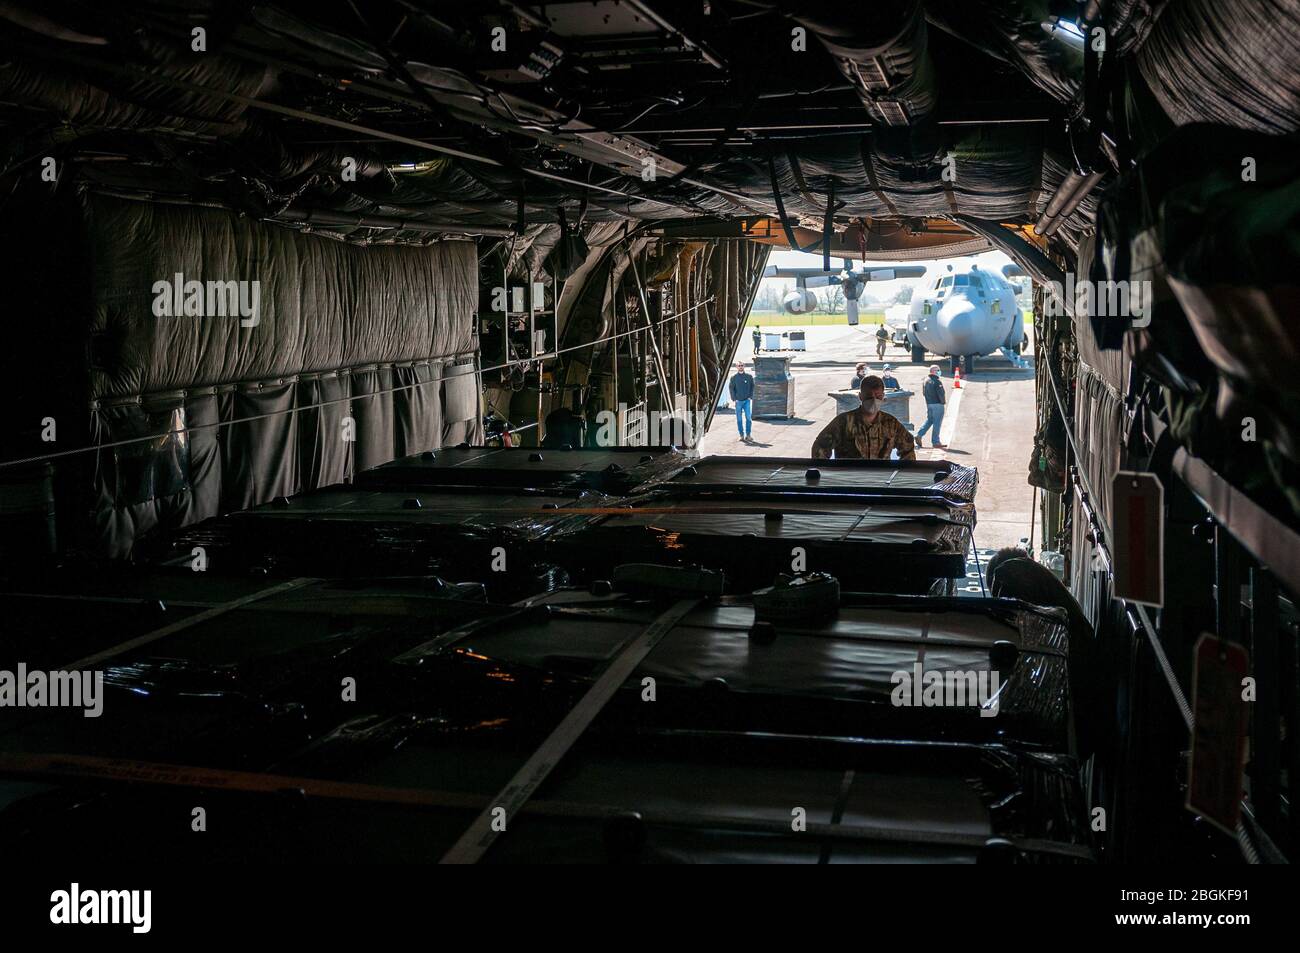 A C-130H Hercules aircrew with the 169th Airlift Squadron, Illinois Air National Guard, loads medical isolation pods onto their aircraft in Eugene, Ore., April 8, 2020. Two 182nd Airlift Wing C-130s airlifted 250 isolation pods in a cross-country, overnight, homeland defense mission delivery to Chicago Midway International Airport for use in the McCormick Place alternative medical facility in the fight against the COVID-19 pandemic. (U.S. Air National Guard photo by Tech. Sgt. Lealan Buehrer) Stock Photo